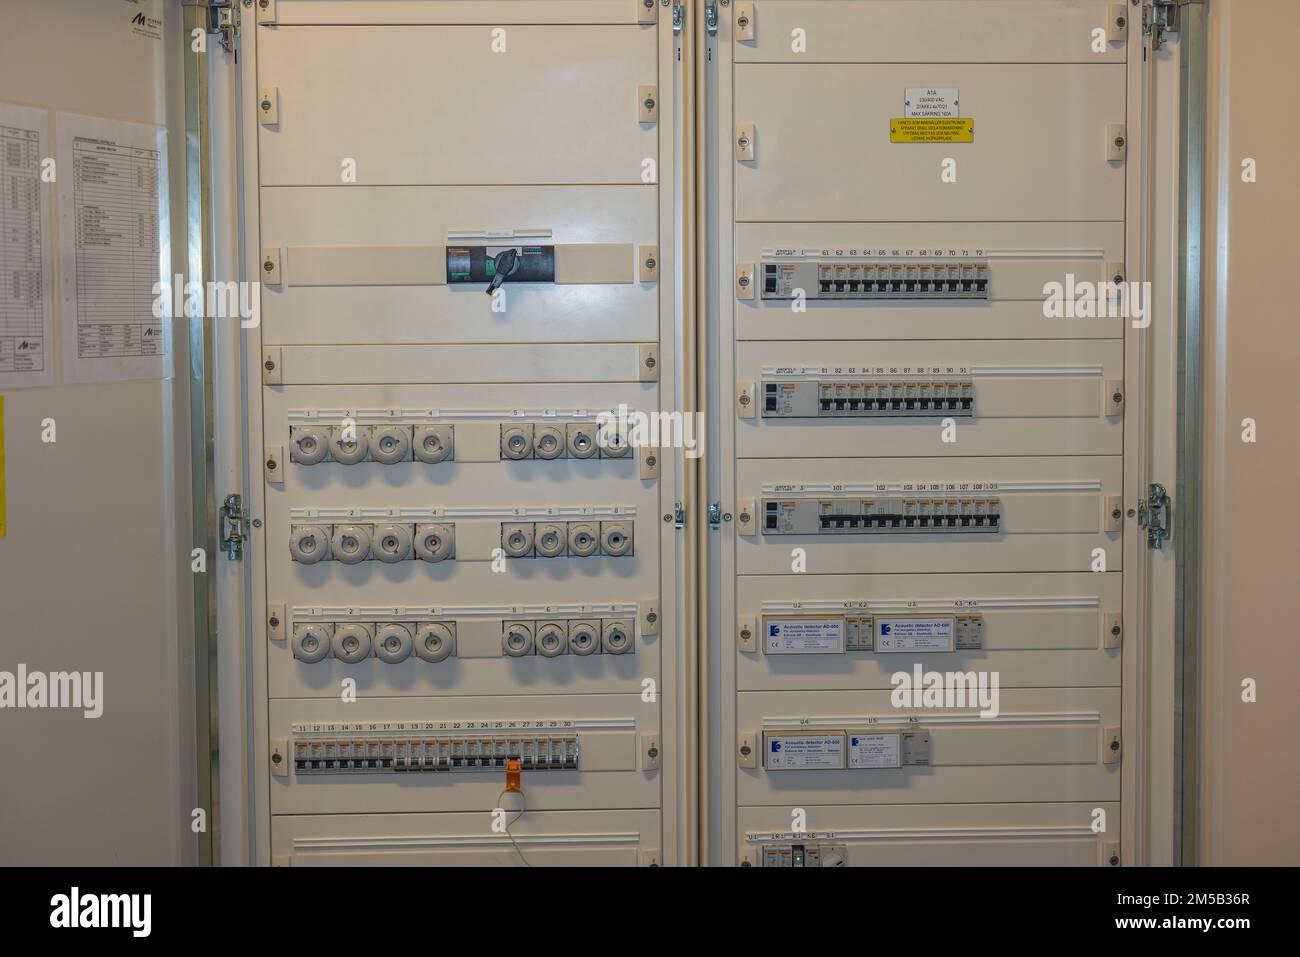 Close-up view of modern electrical fuse board. Sweden. Stock Photo